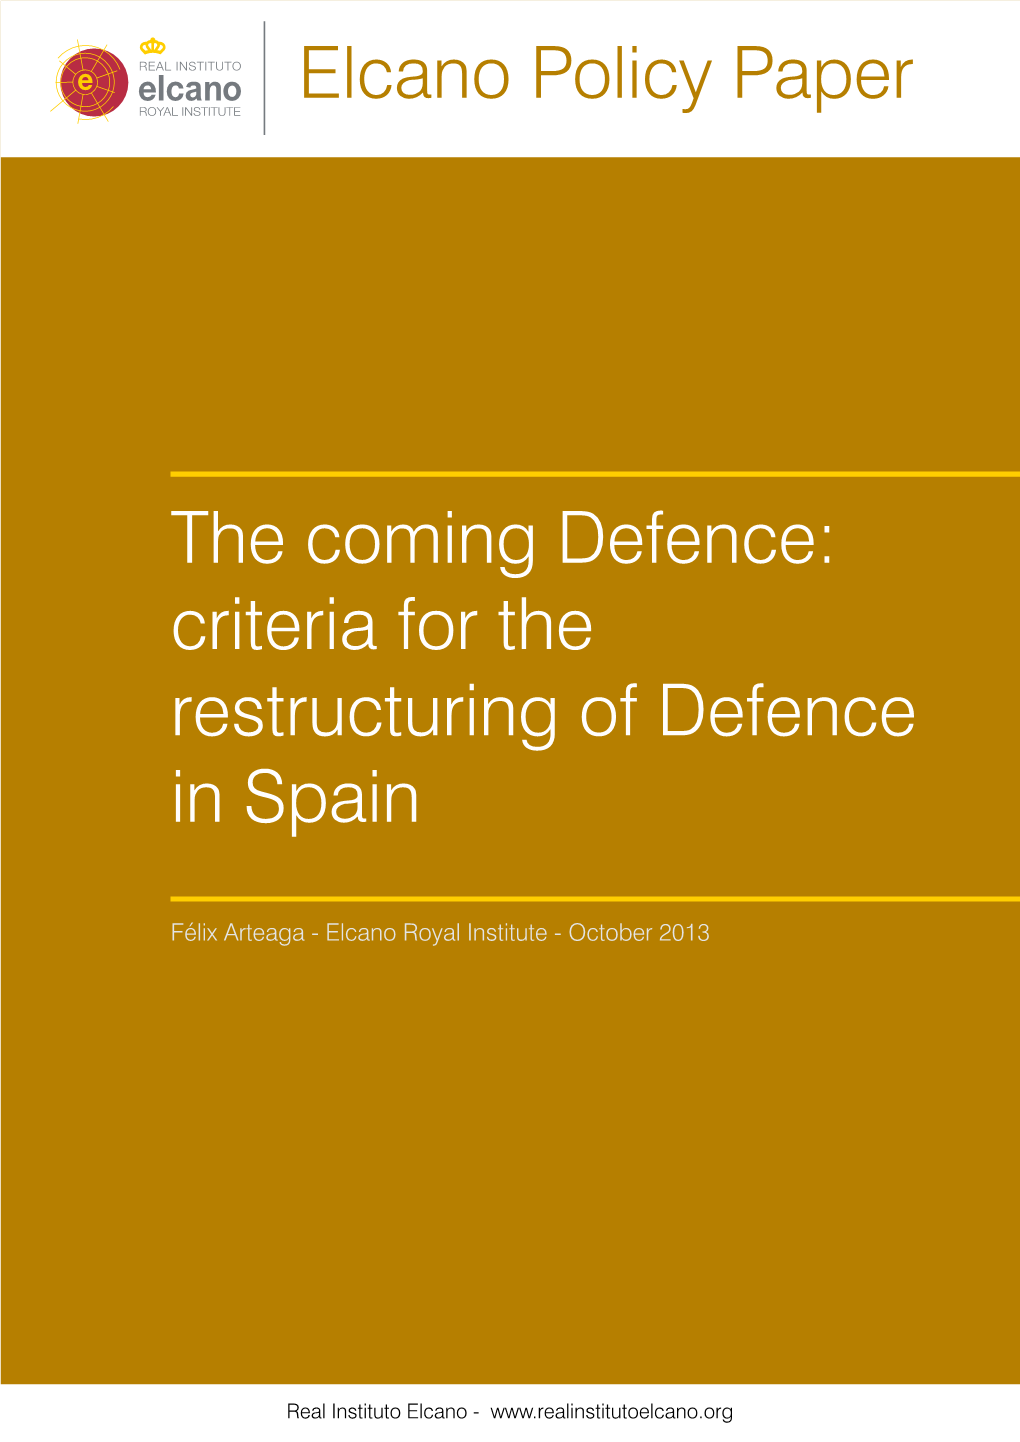 Criteria for the Restructuring of Defence in Spain